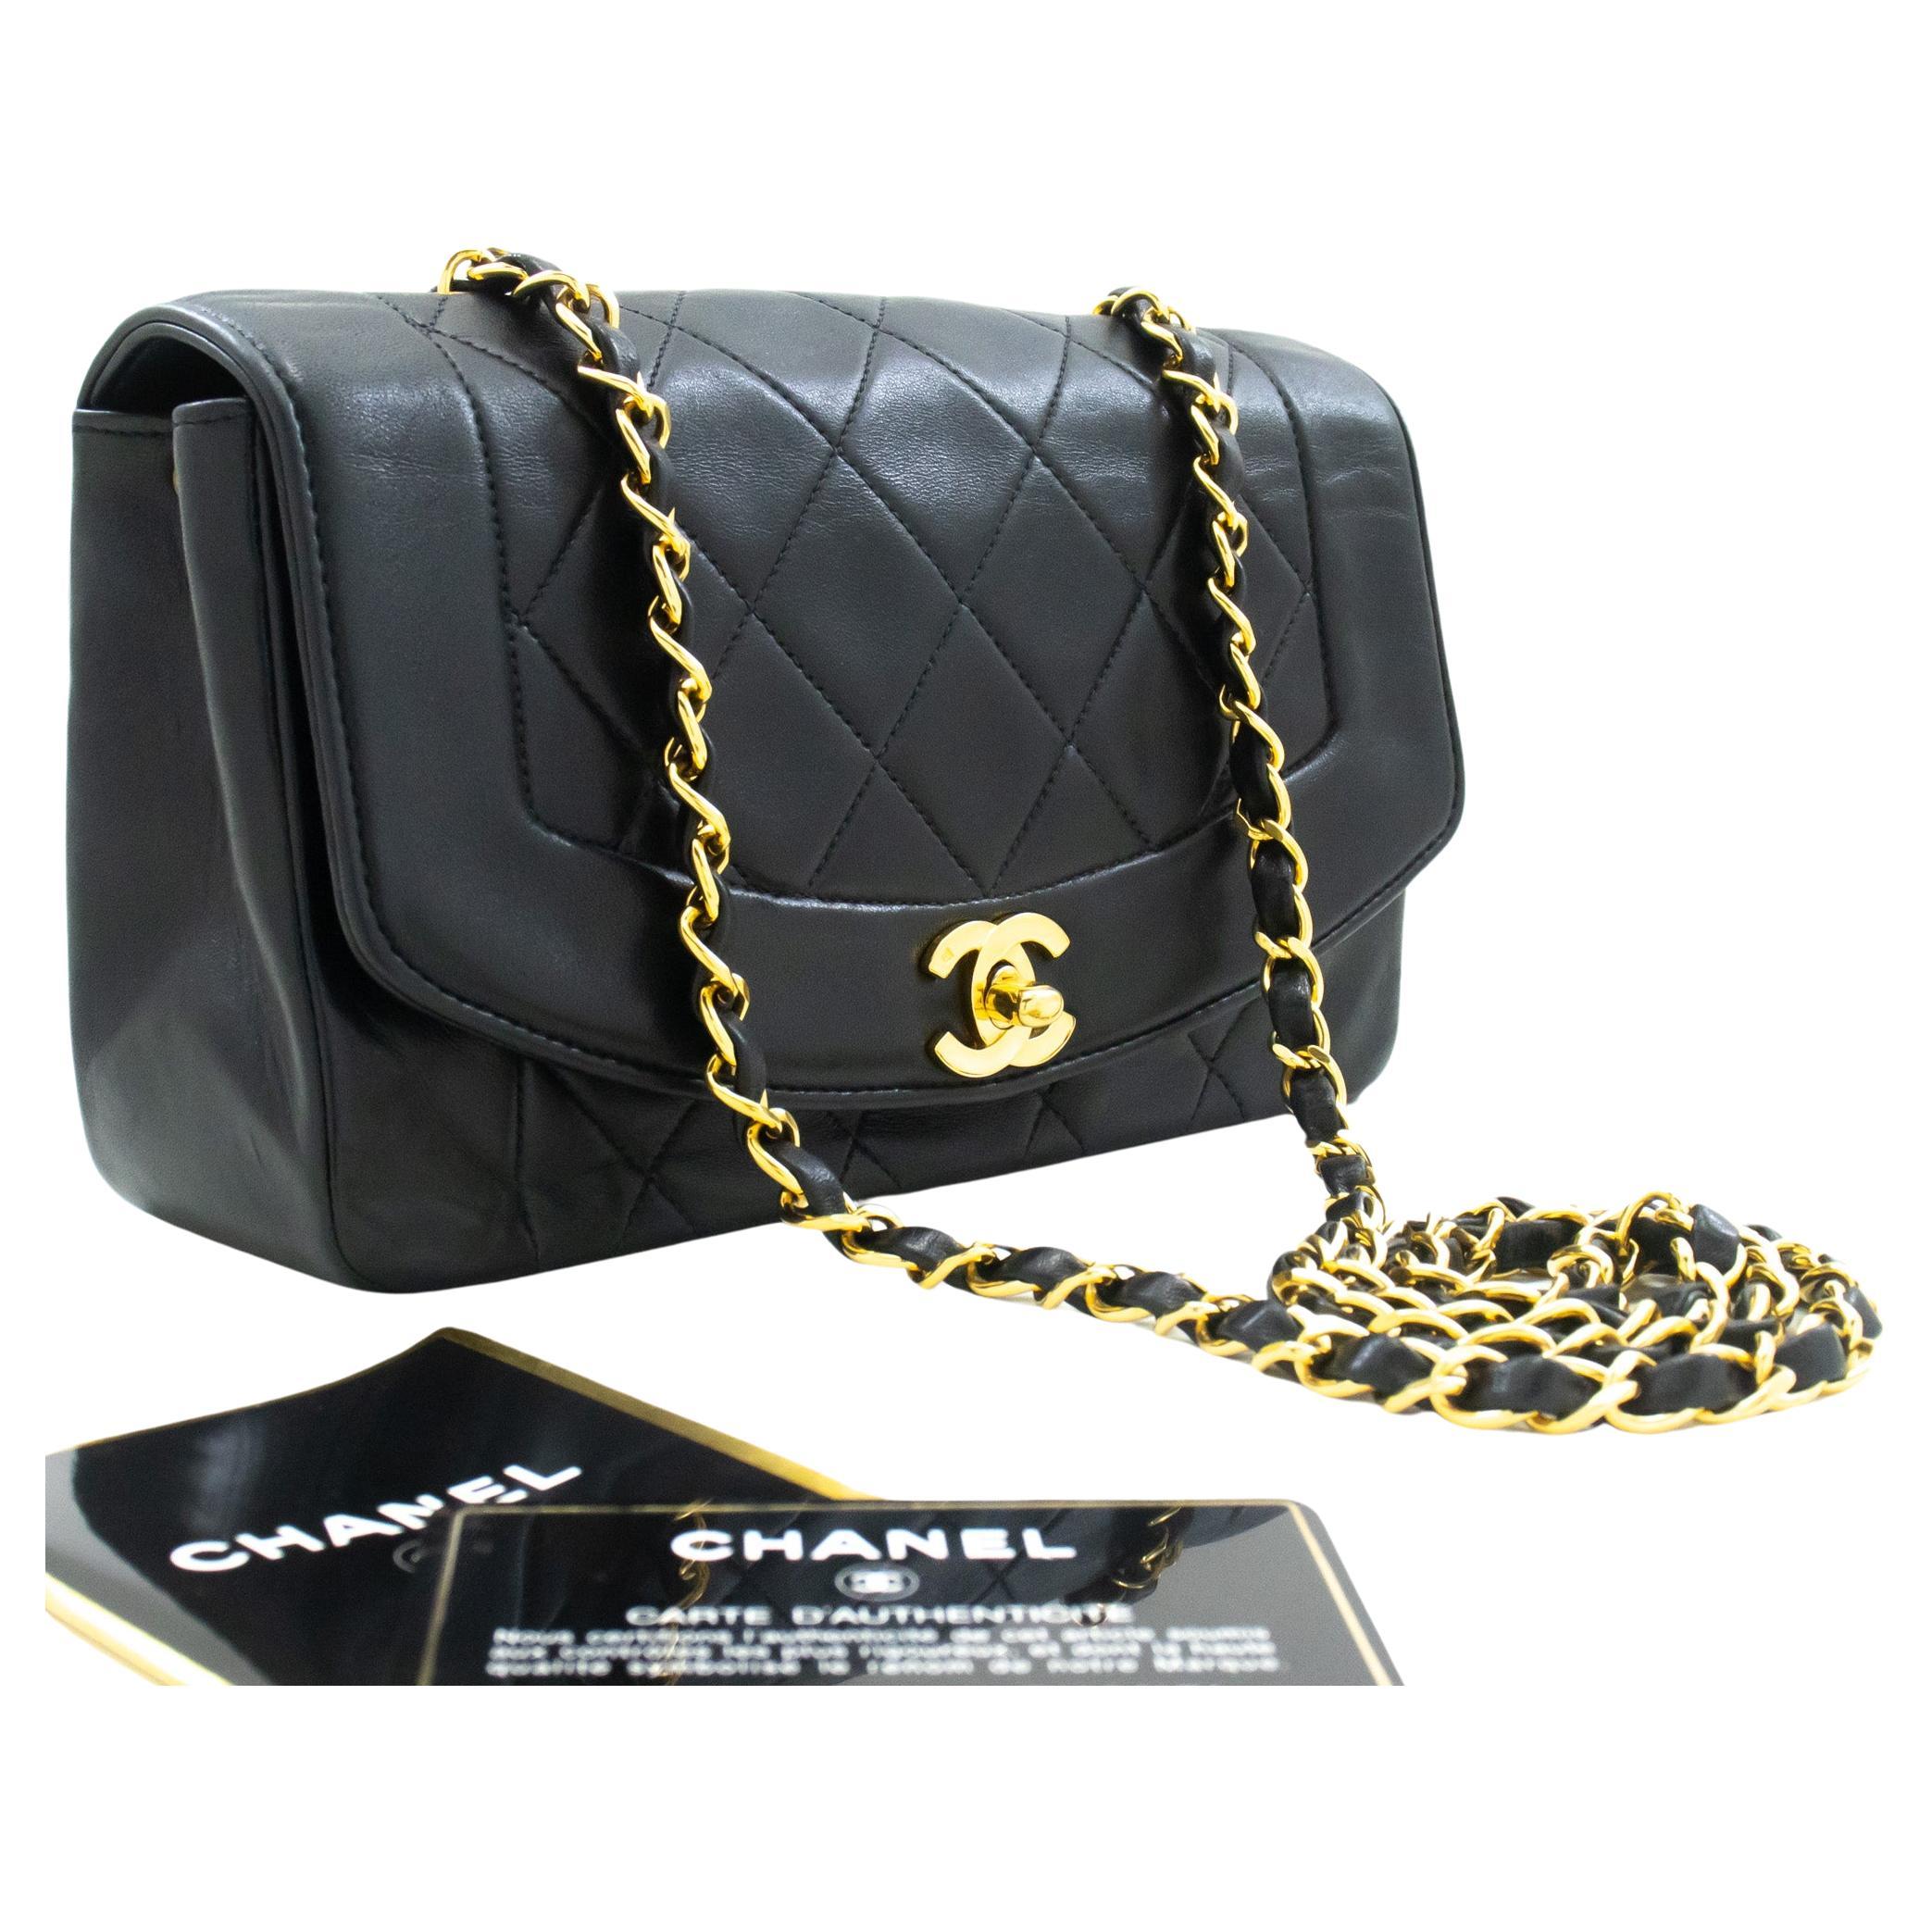 What is considered vintage for Chanel bags?